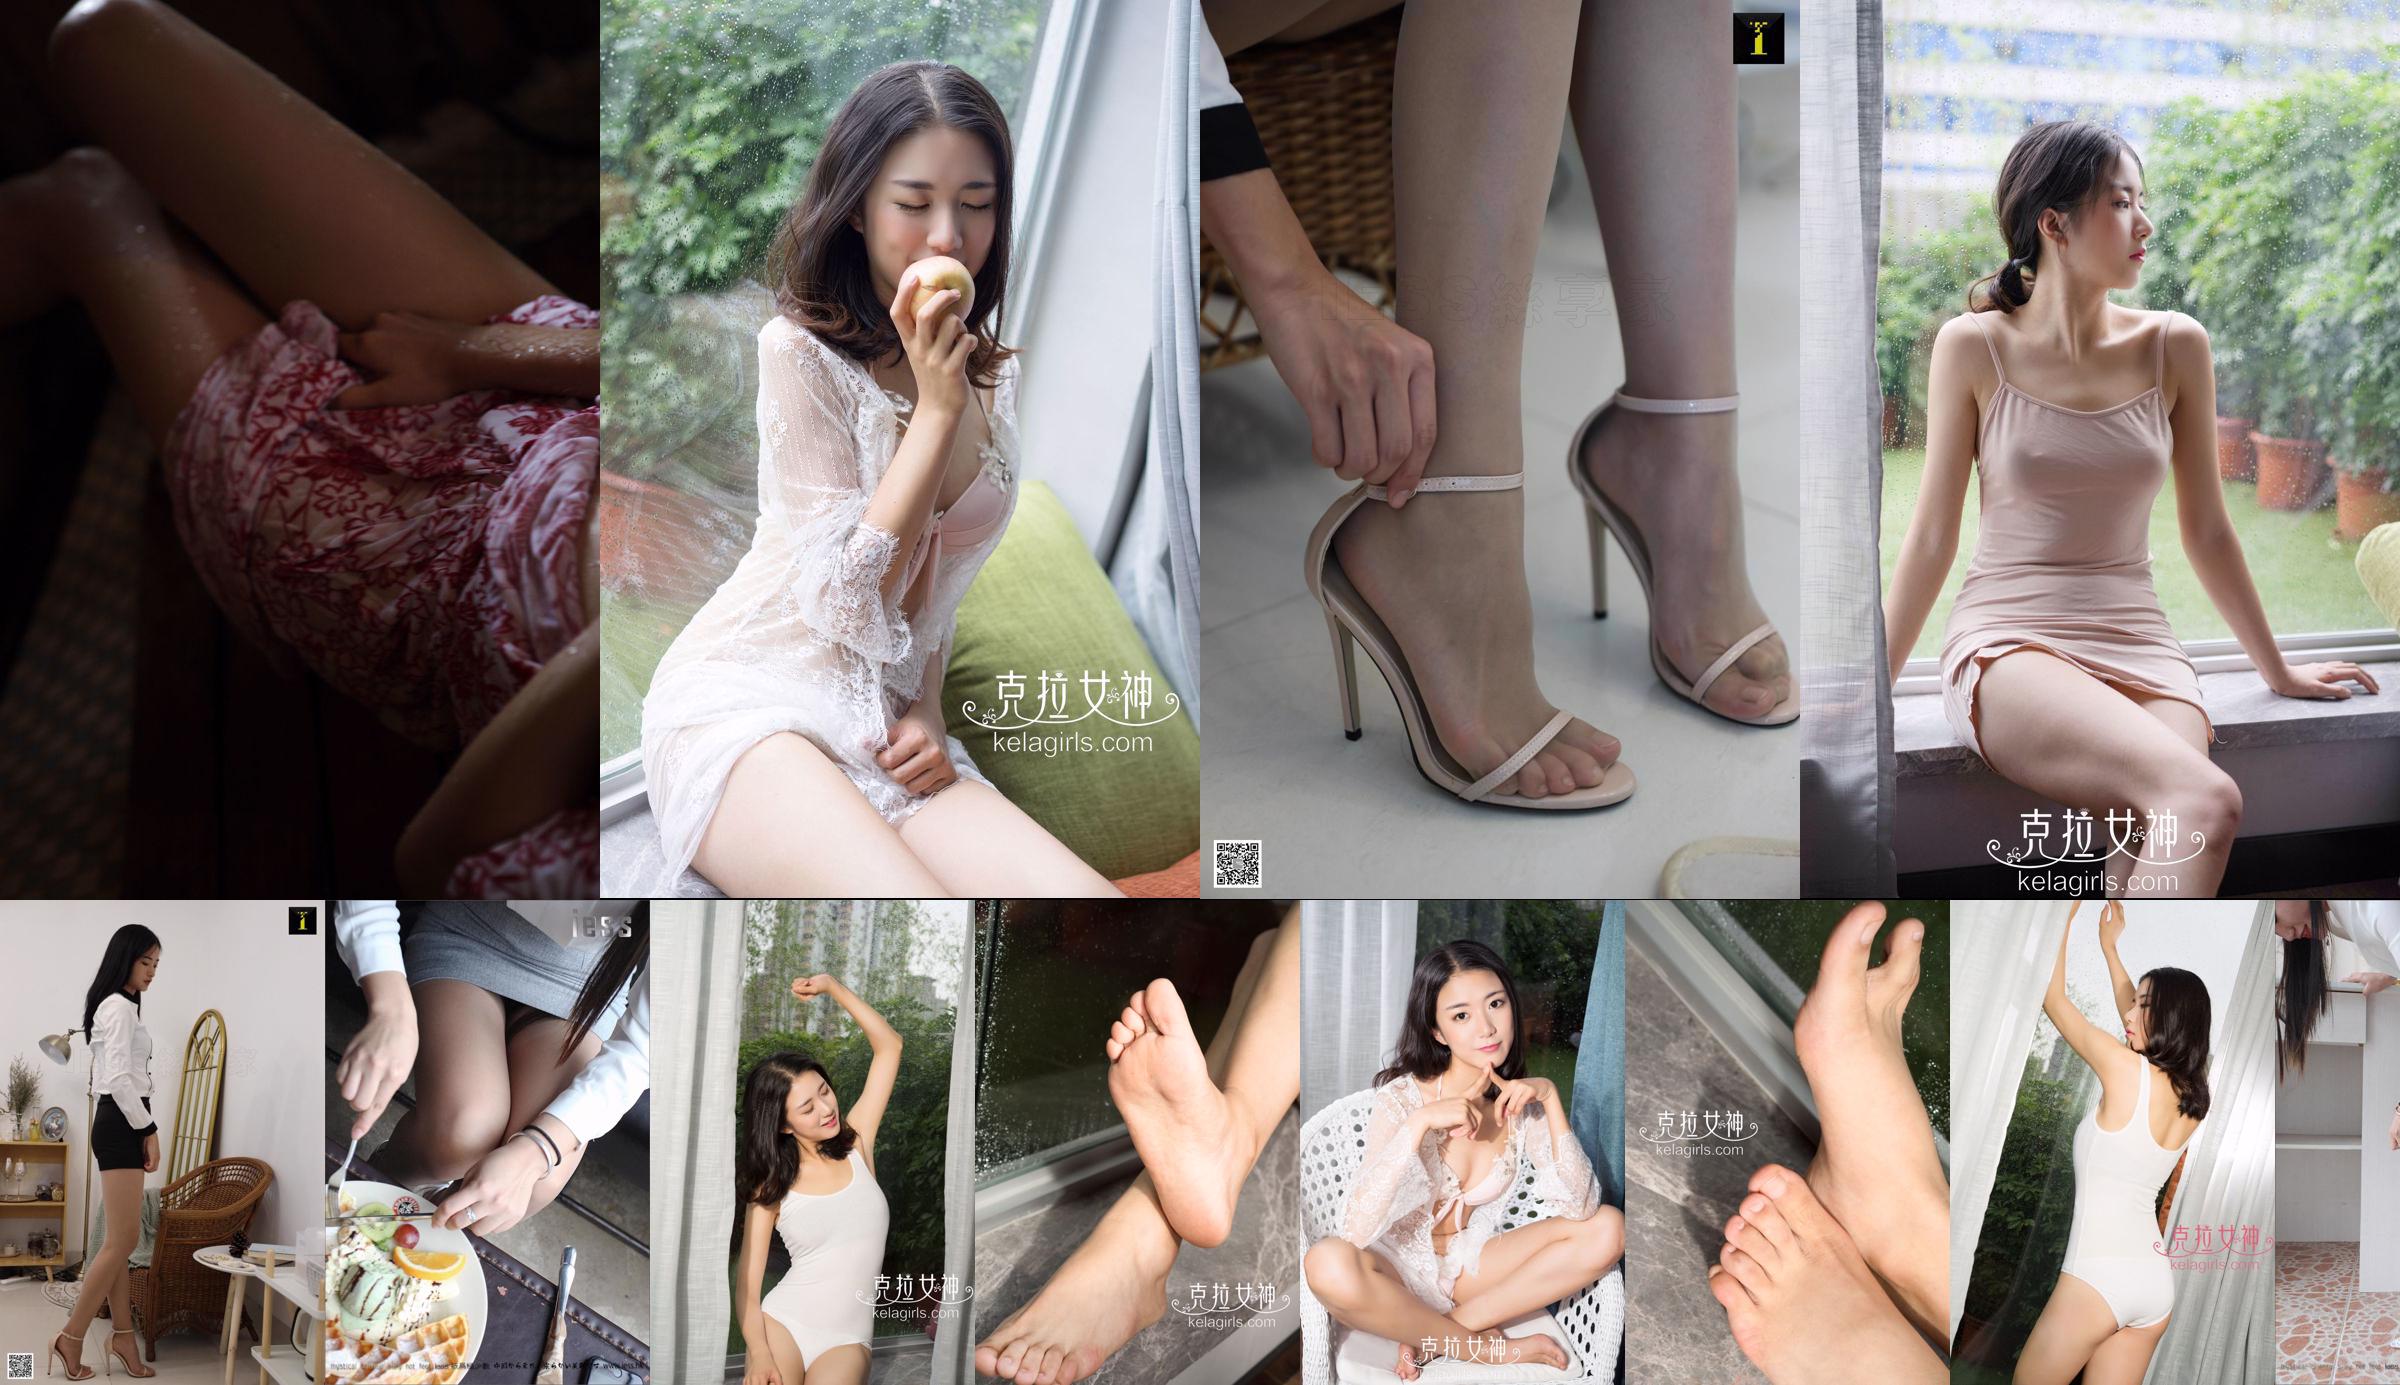 [Gentleman Photography] SS010 Ningning No.ca376c Page 10